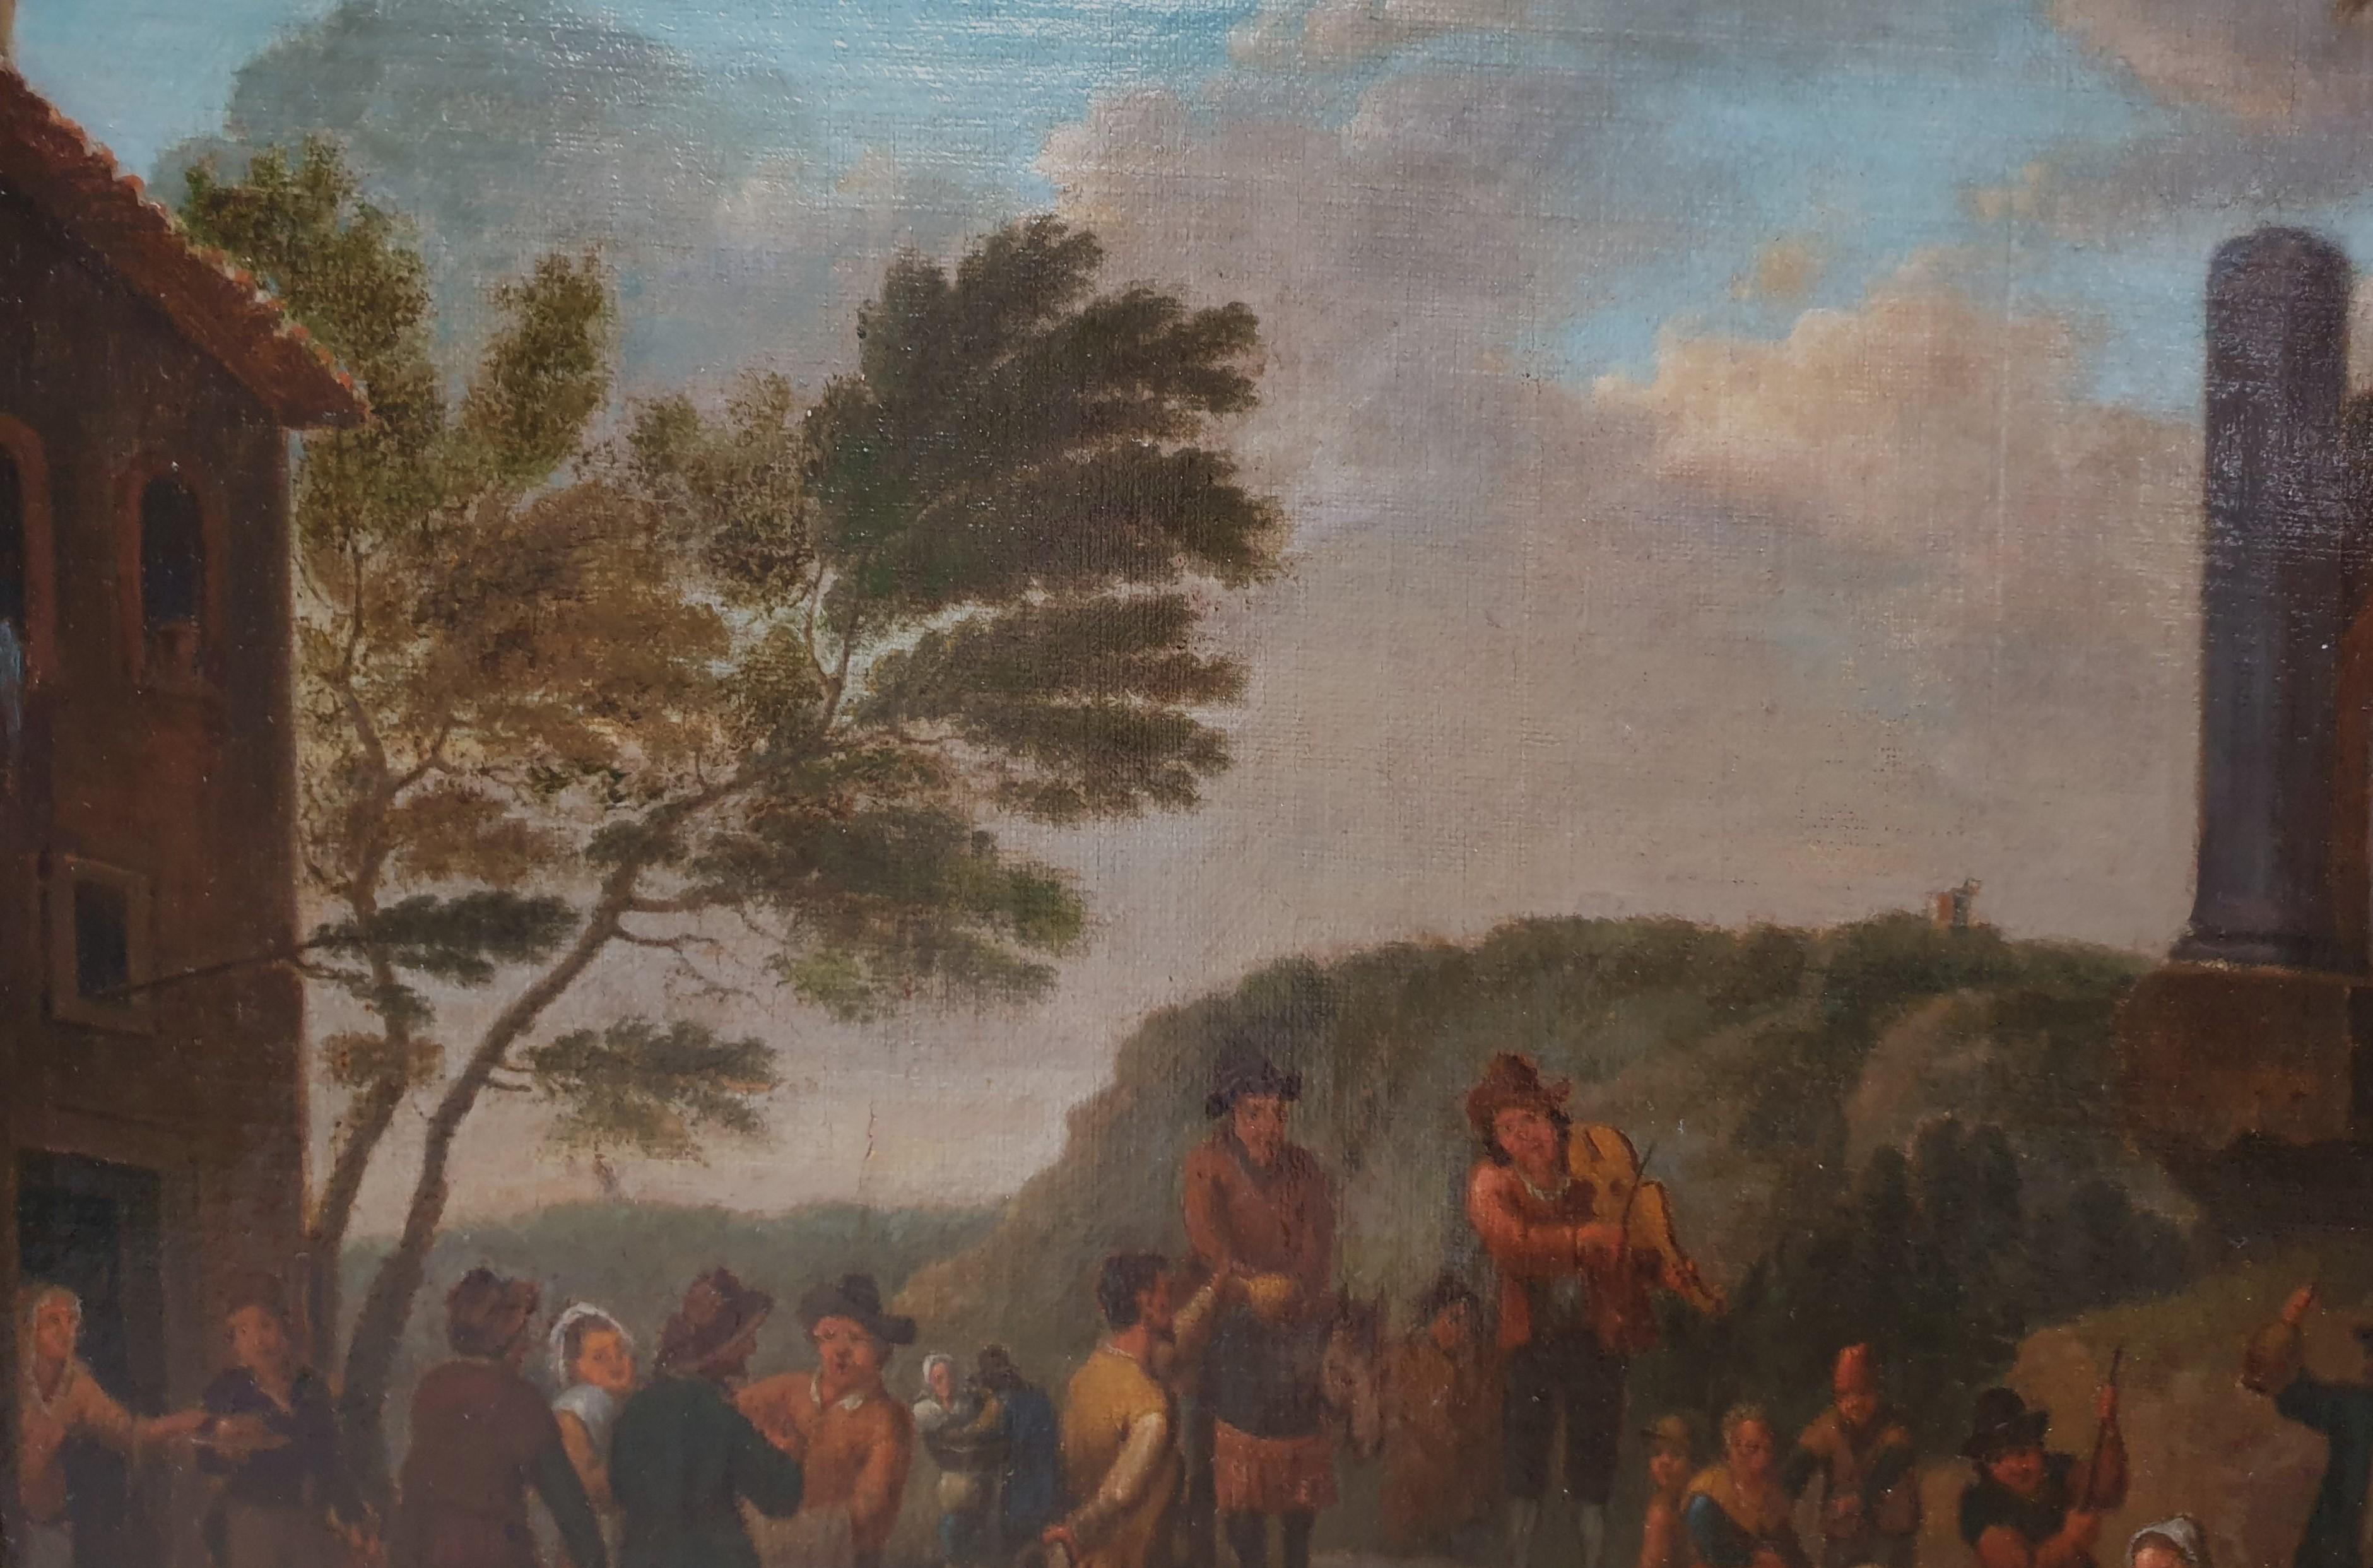 Johannes JANSON (Attributed to) Amboyna (Moluccan Islands), 1729 - Leyden, 1784 Oil on canvas 47 x 57 cm (62 x 72 cm with frame) Trace of signature lower right Monogrammed and dated on the back 